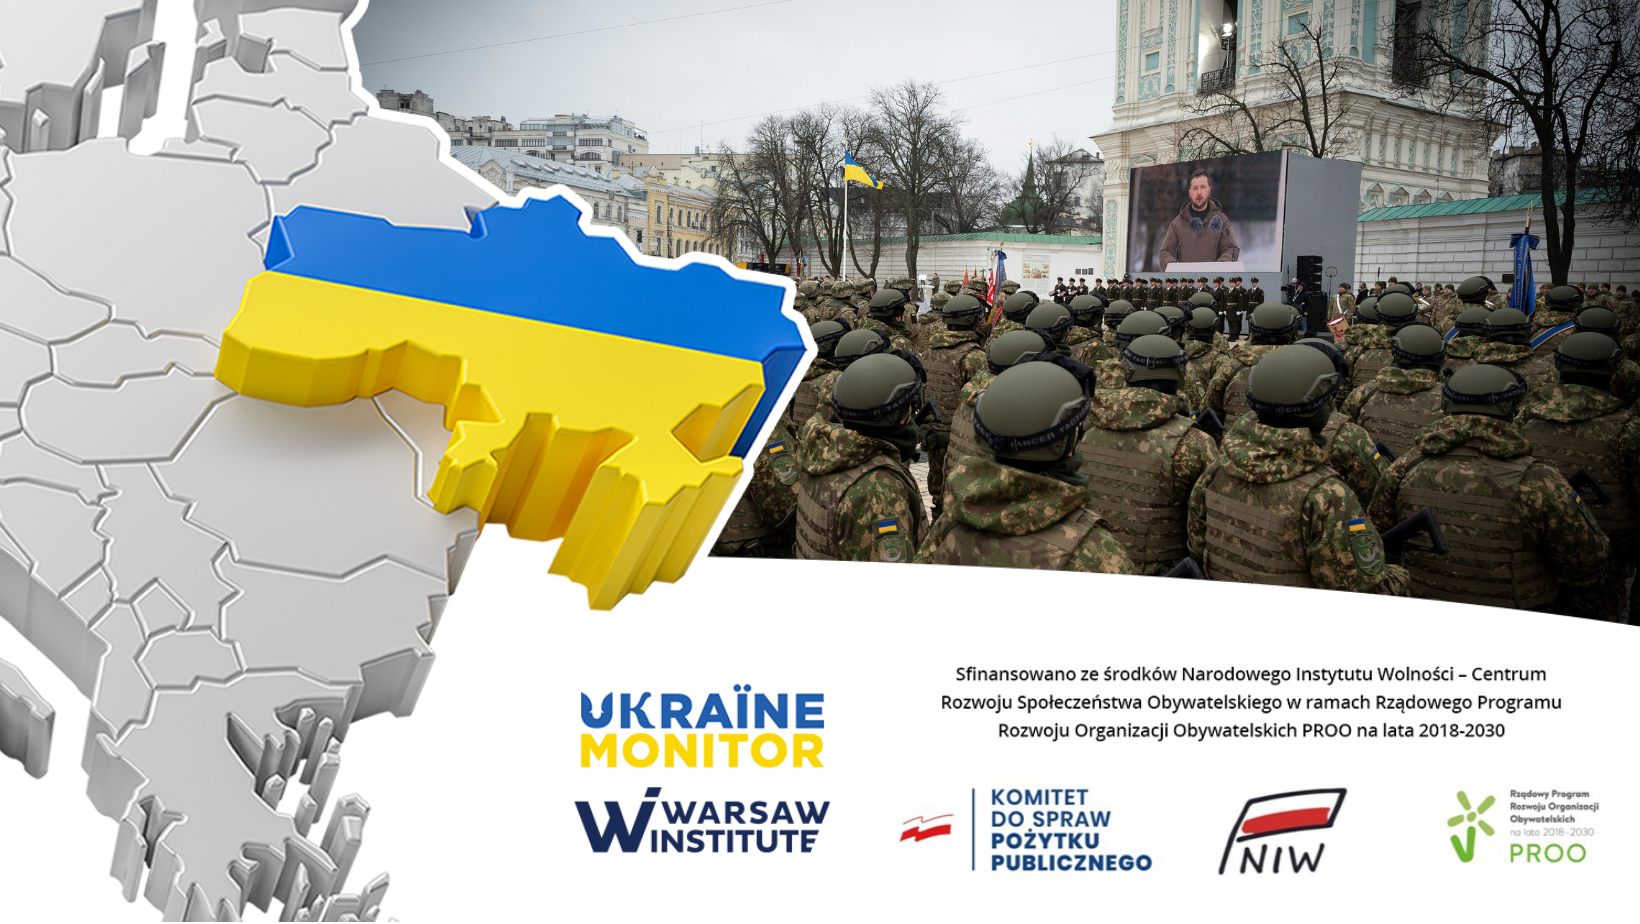 Marking One Year of Russia’s Full-Scale Invasion of Ukraine